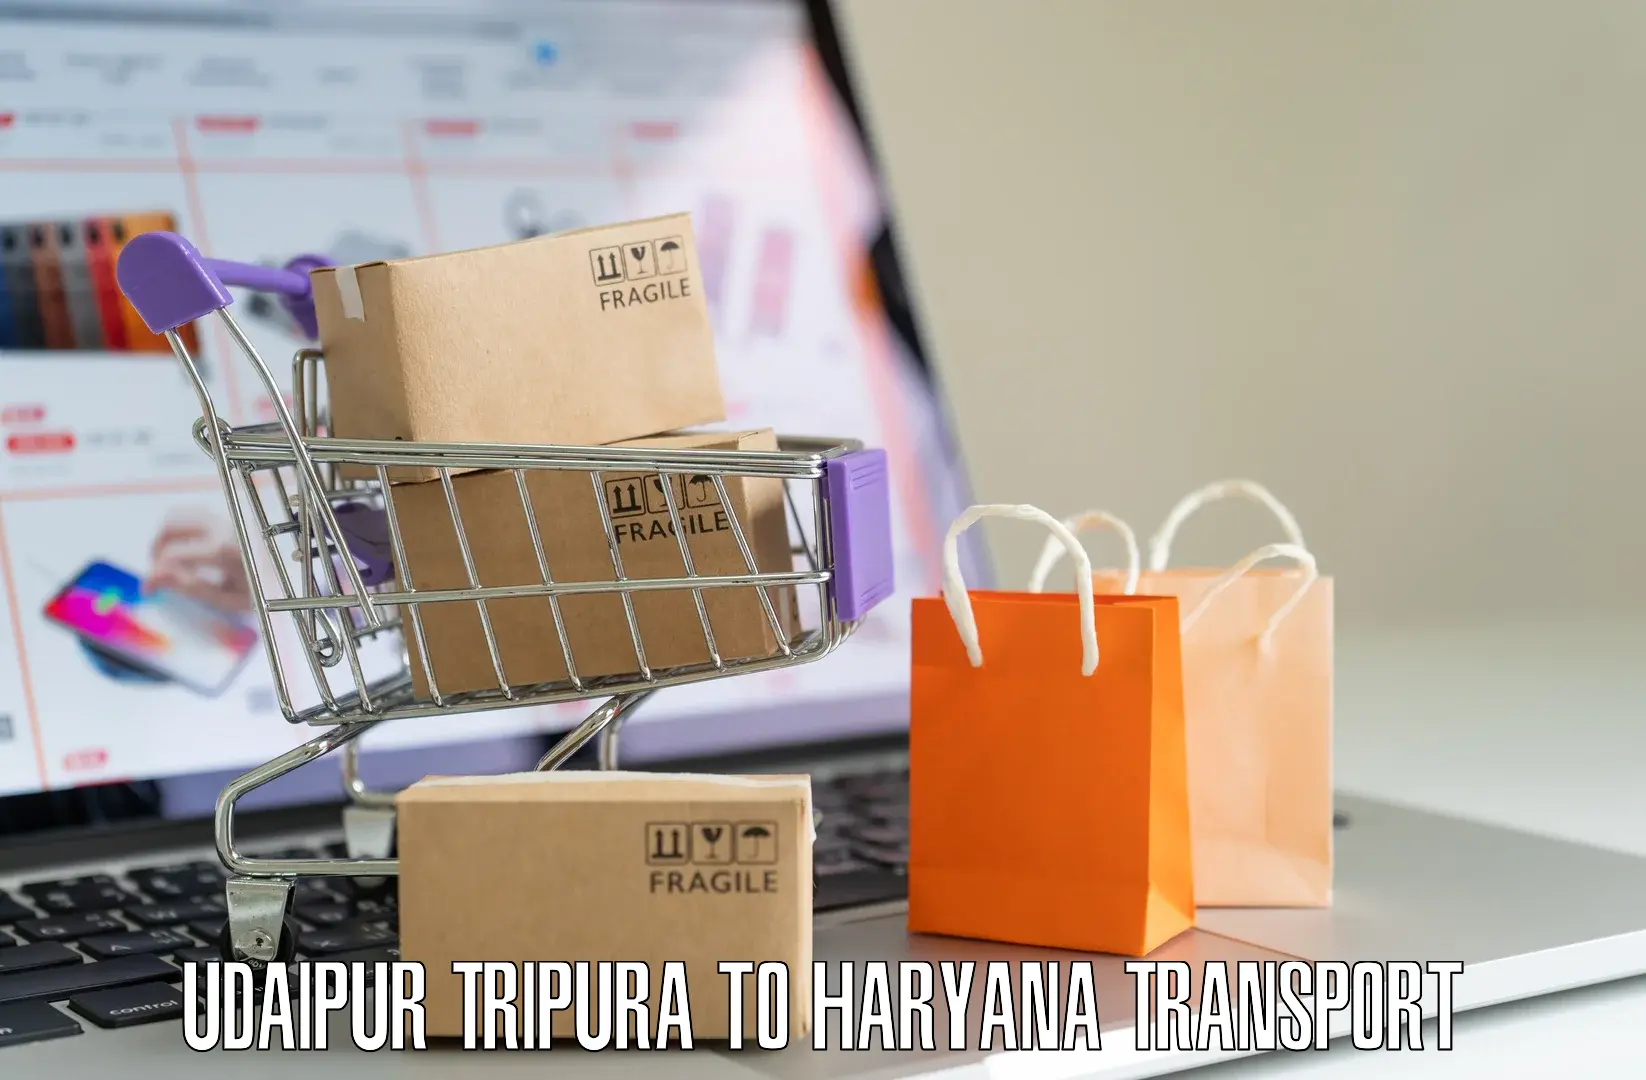 Delivery service Udaipur Tripura to Palwal